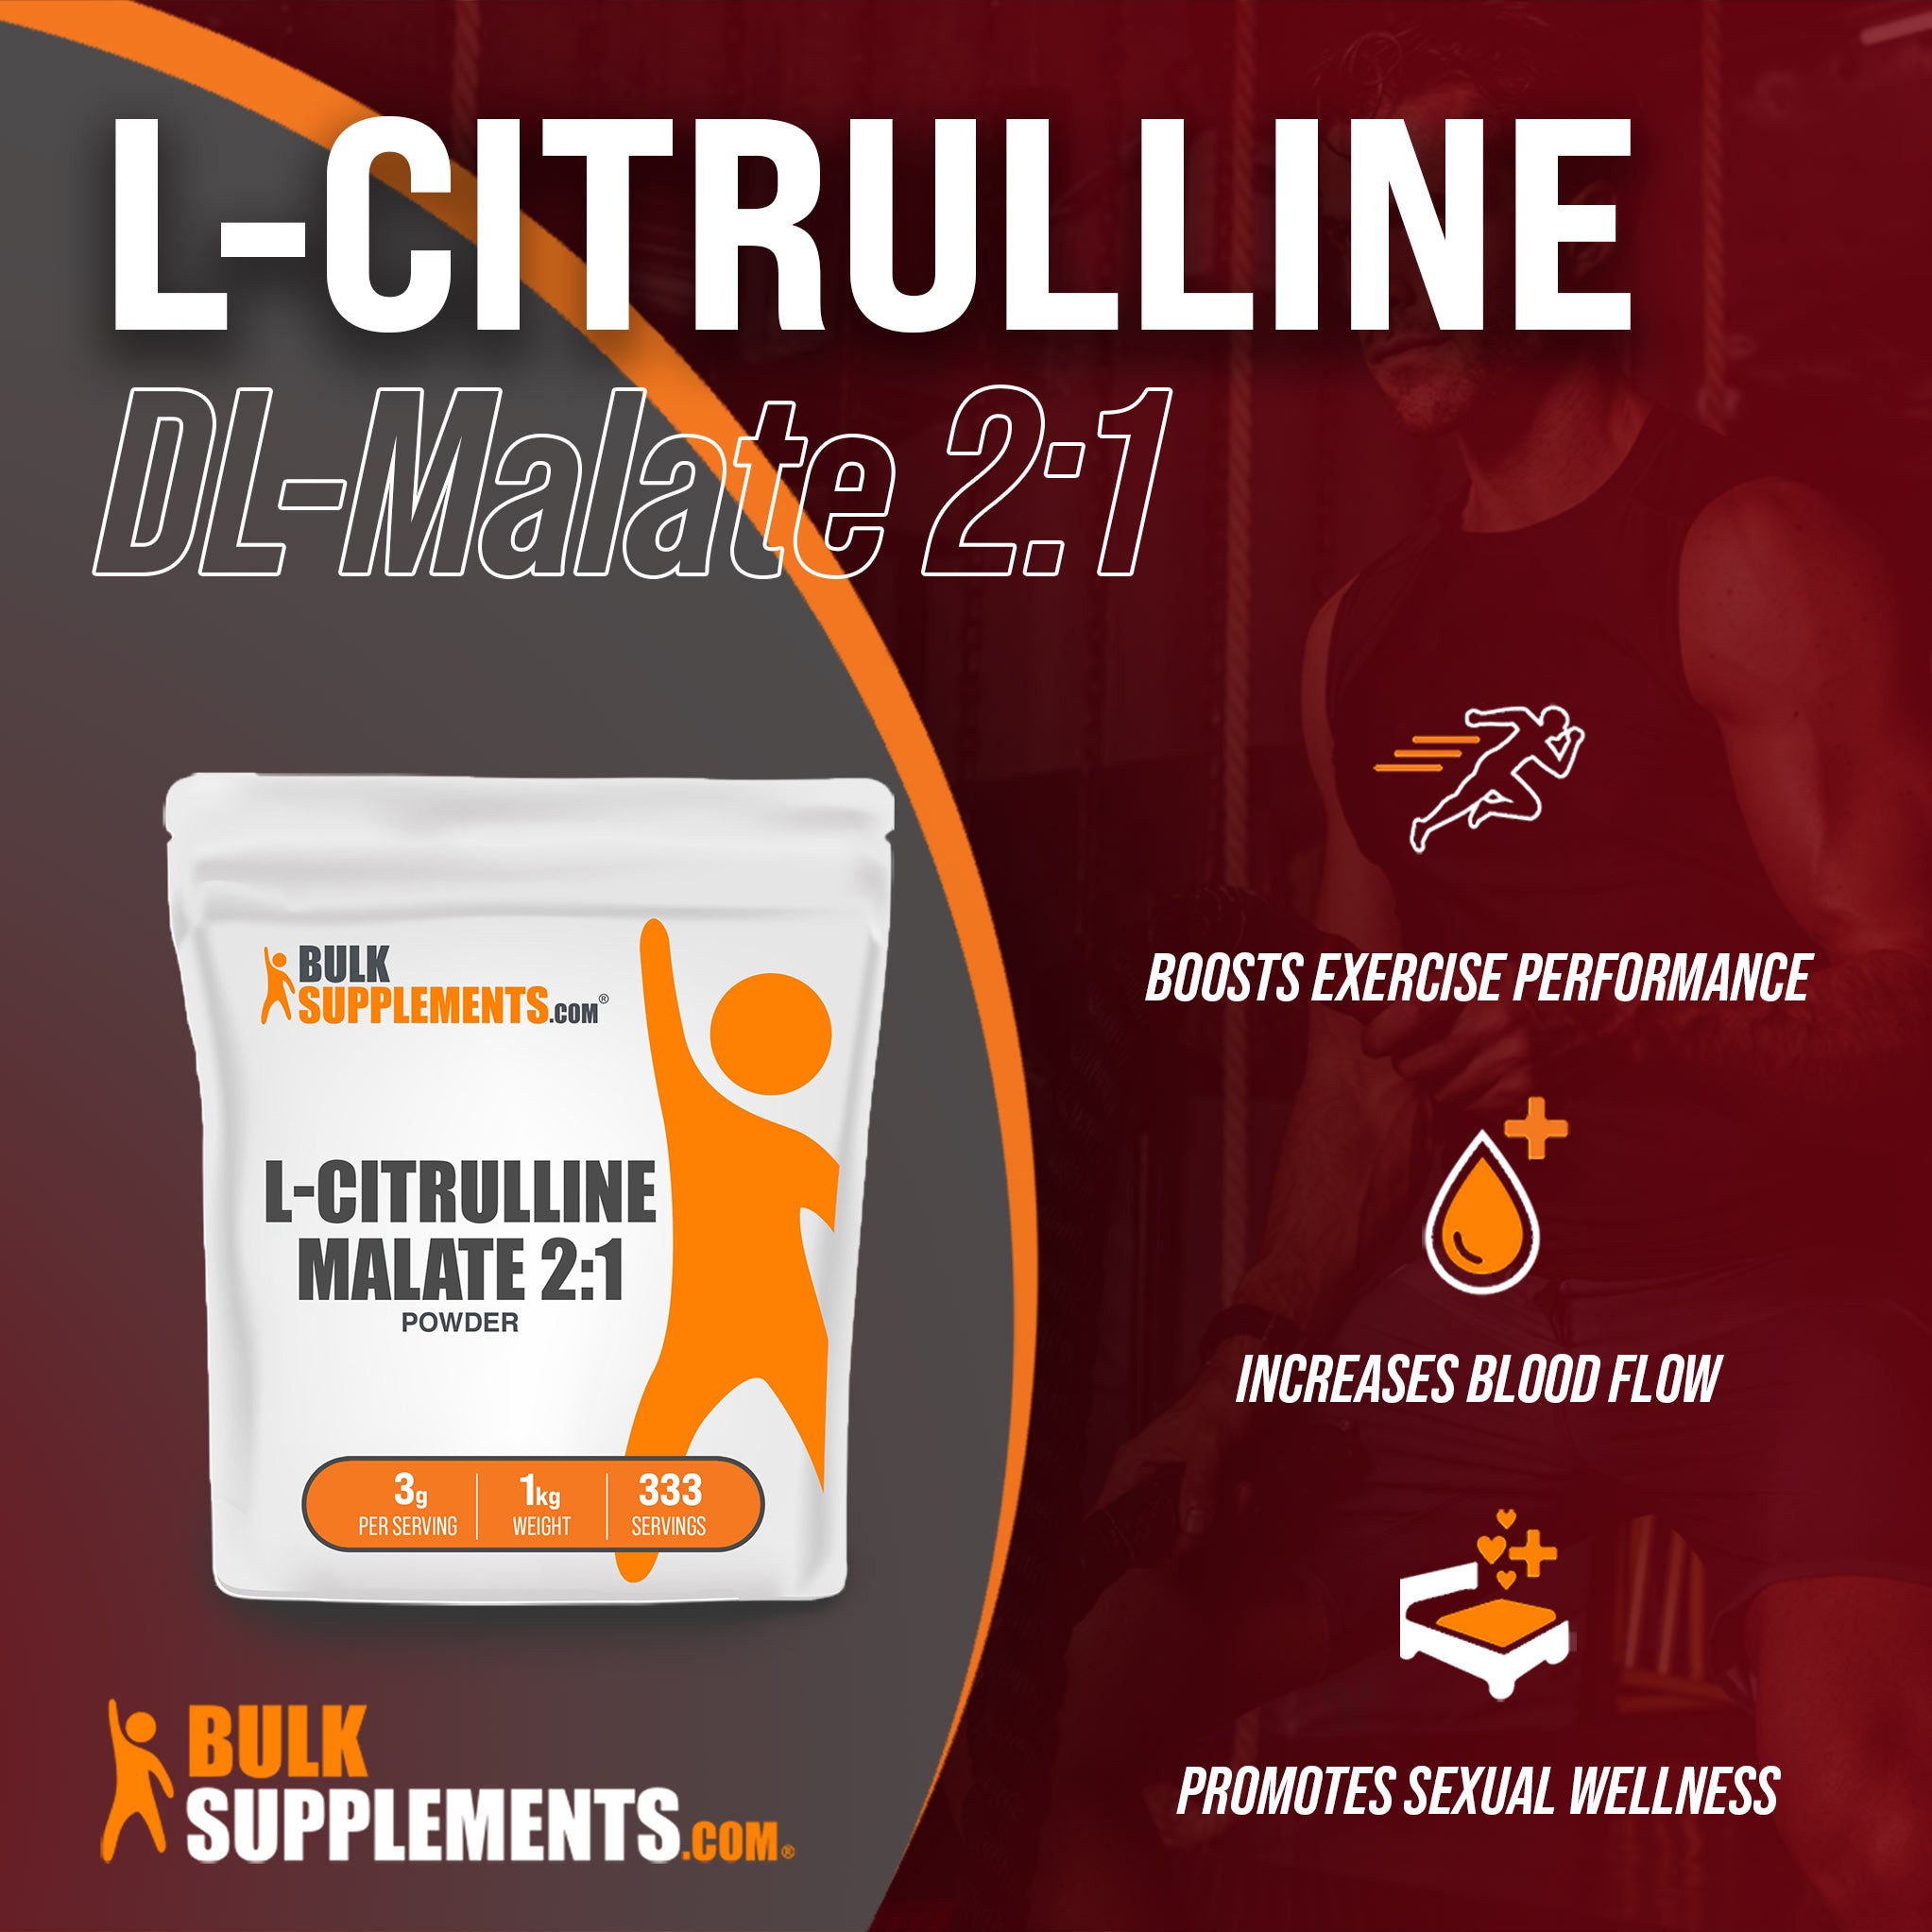 Benefits of L-Citrulline DL-Malate 2:1 - boosts exercise performance, increases blood flow, promotes sexual wellness